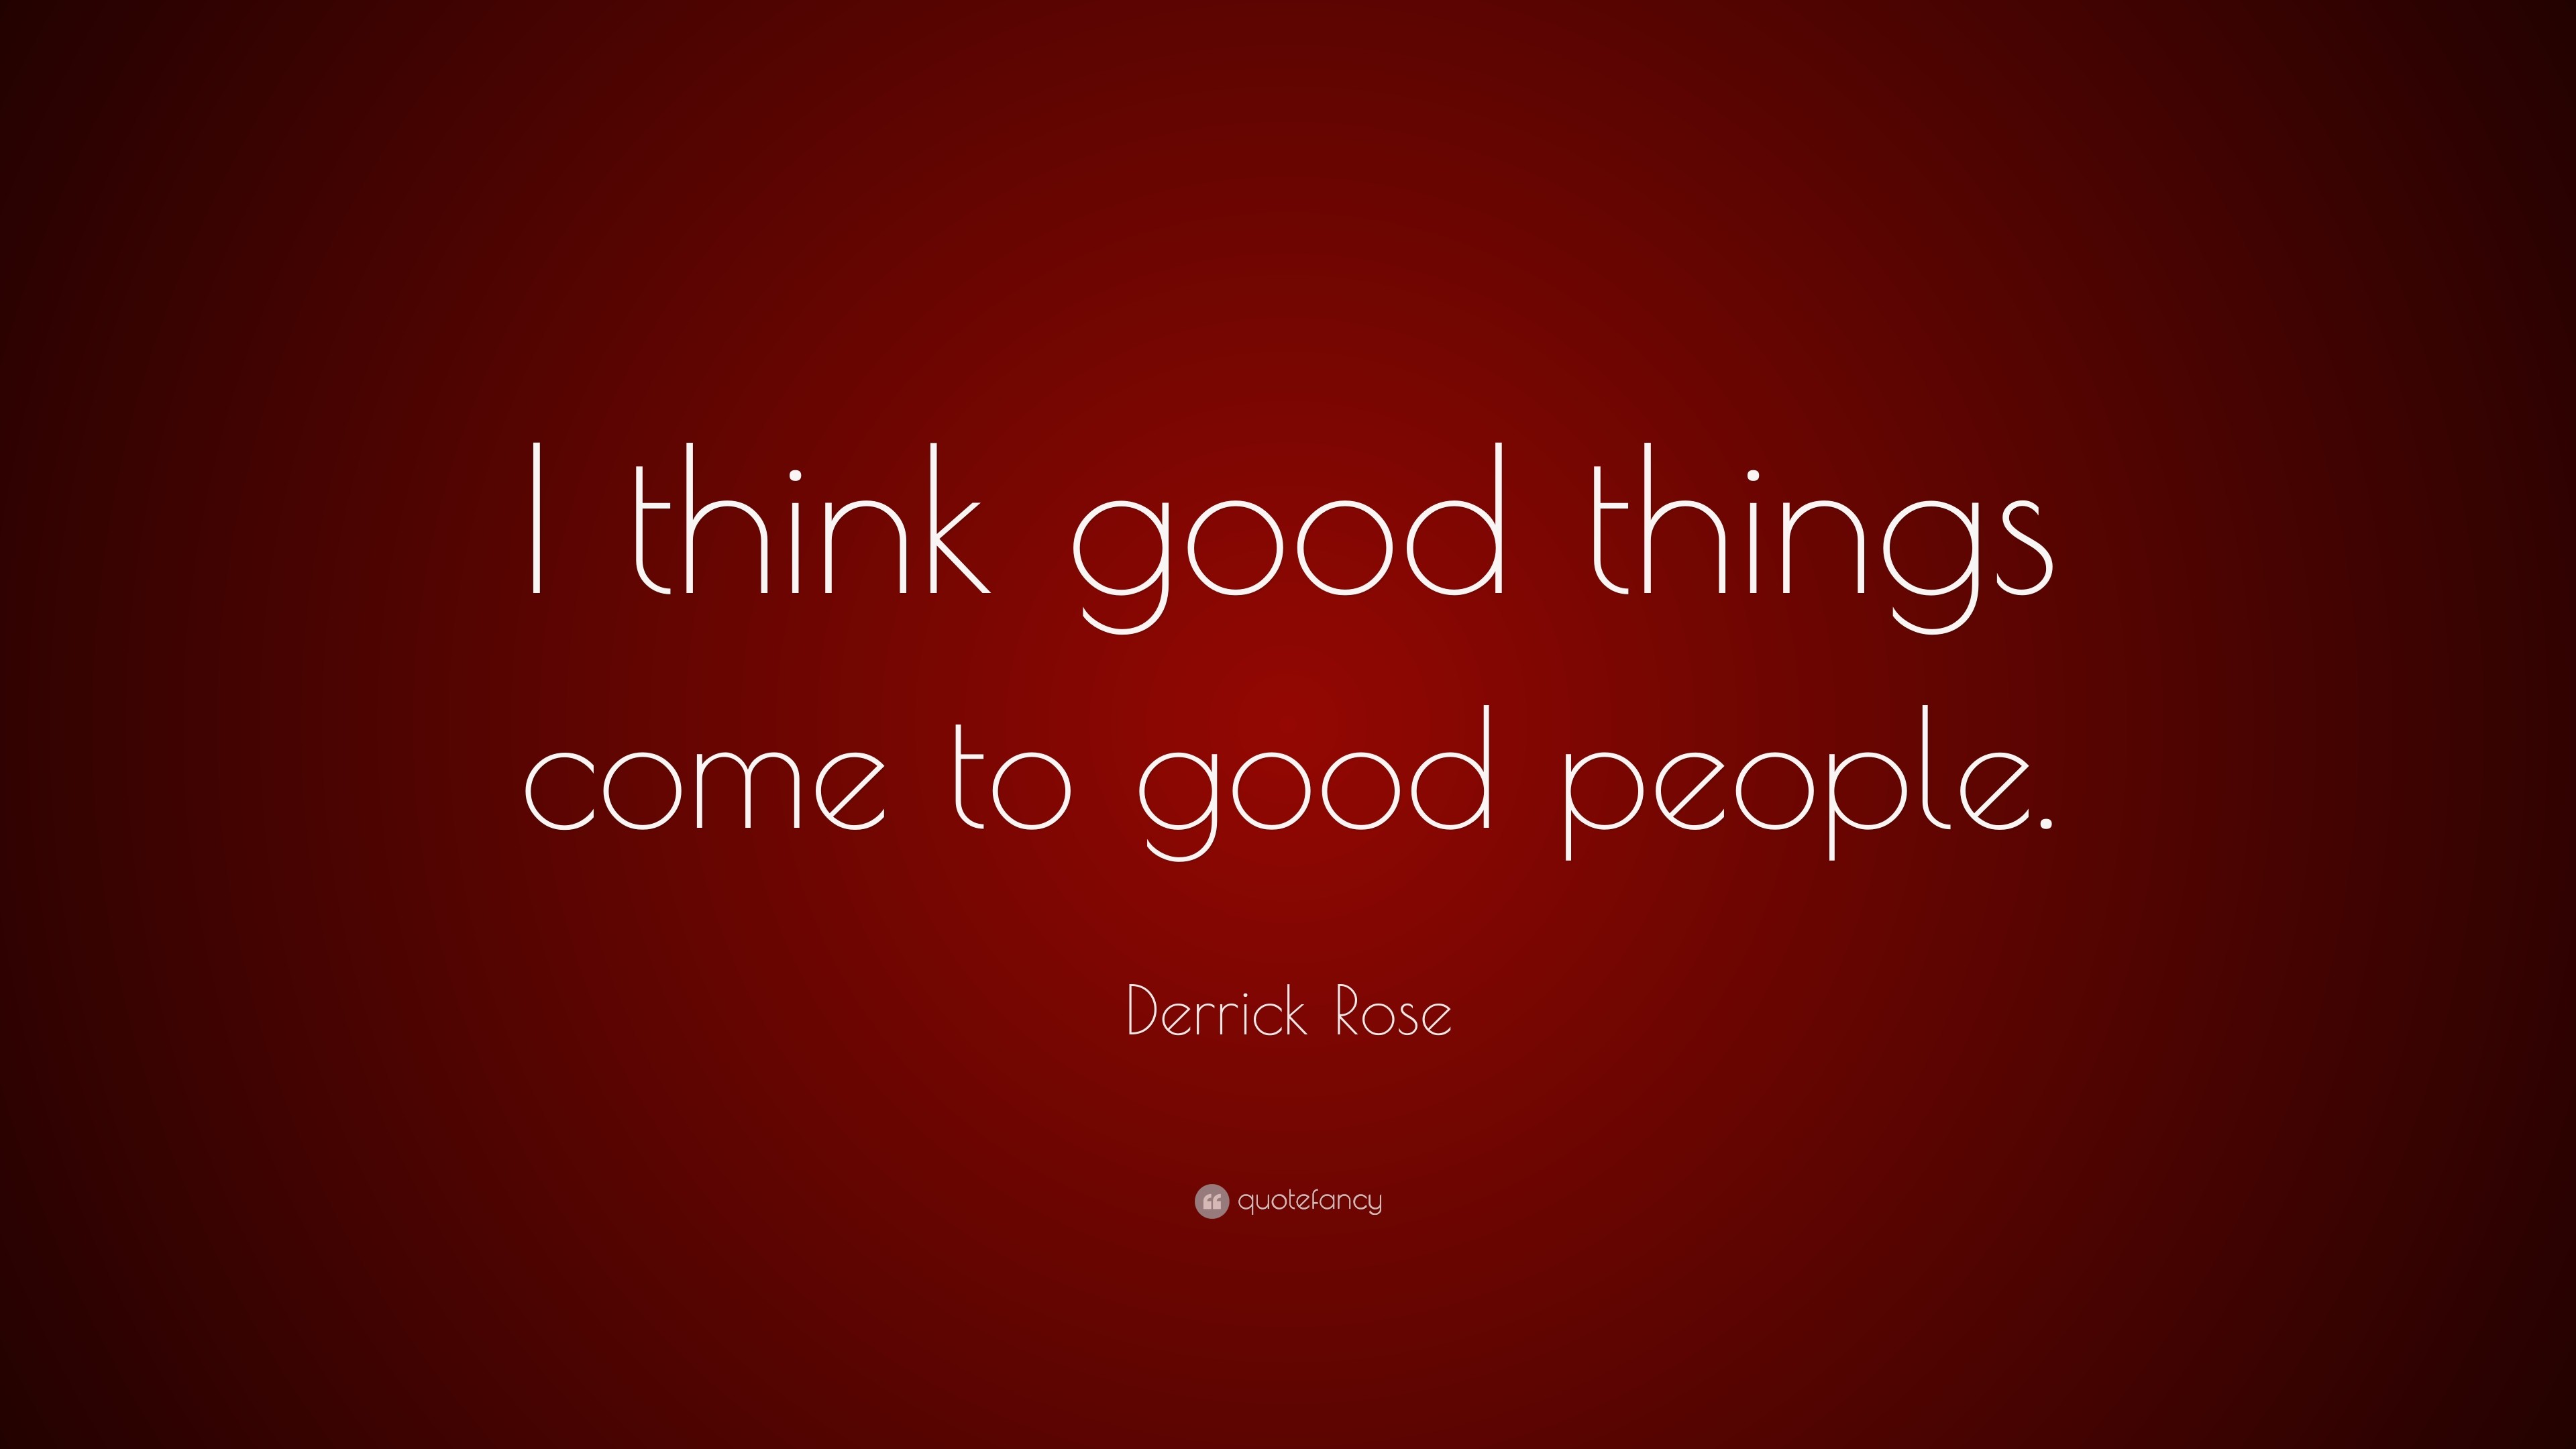 3840x2160 Derrick Rose Quote: “I think good things come to good people.”